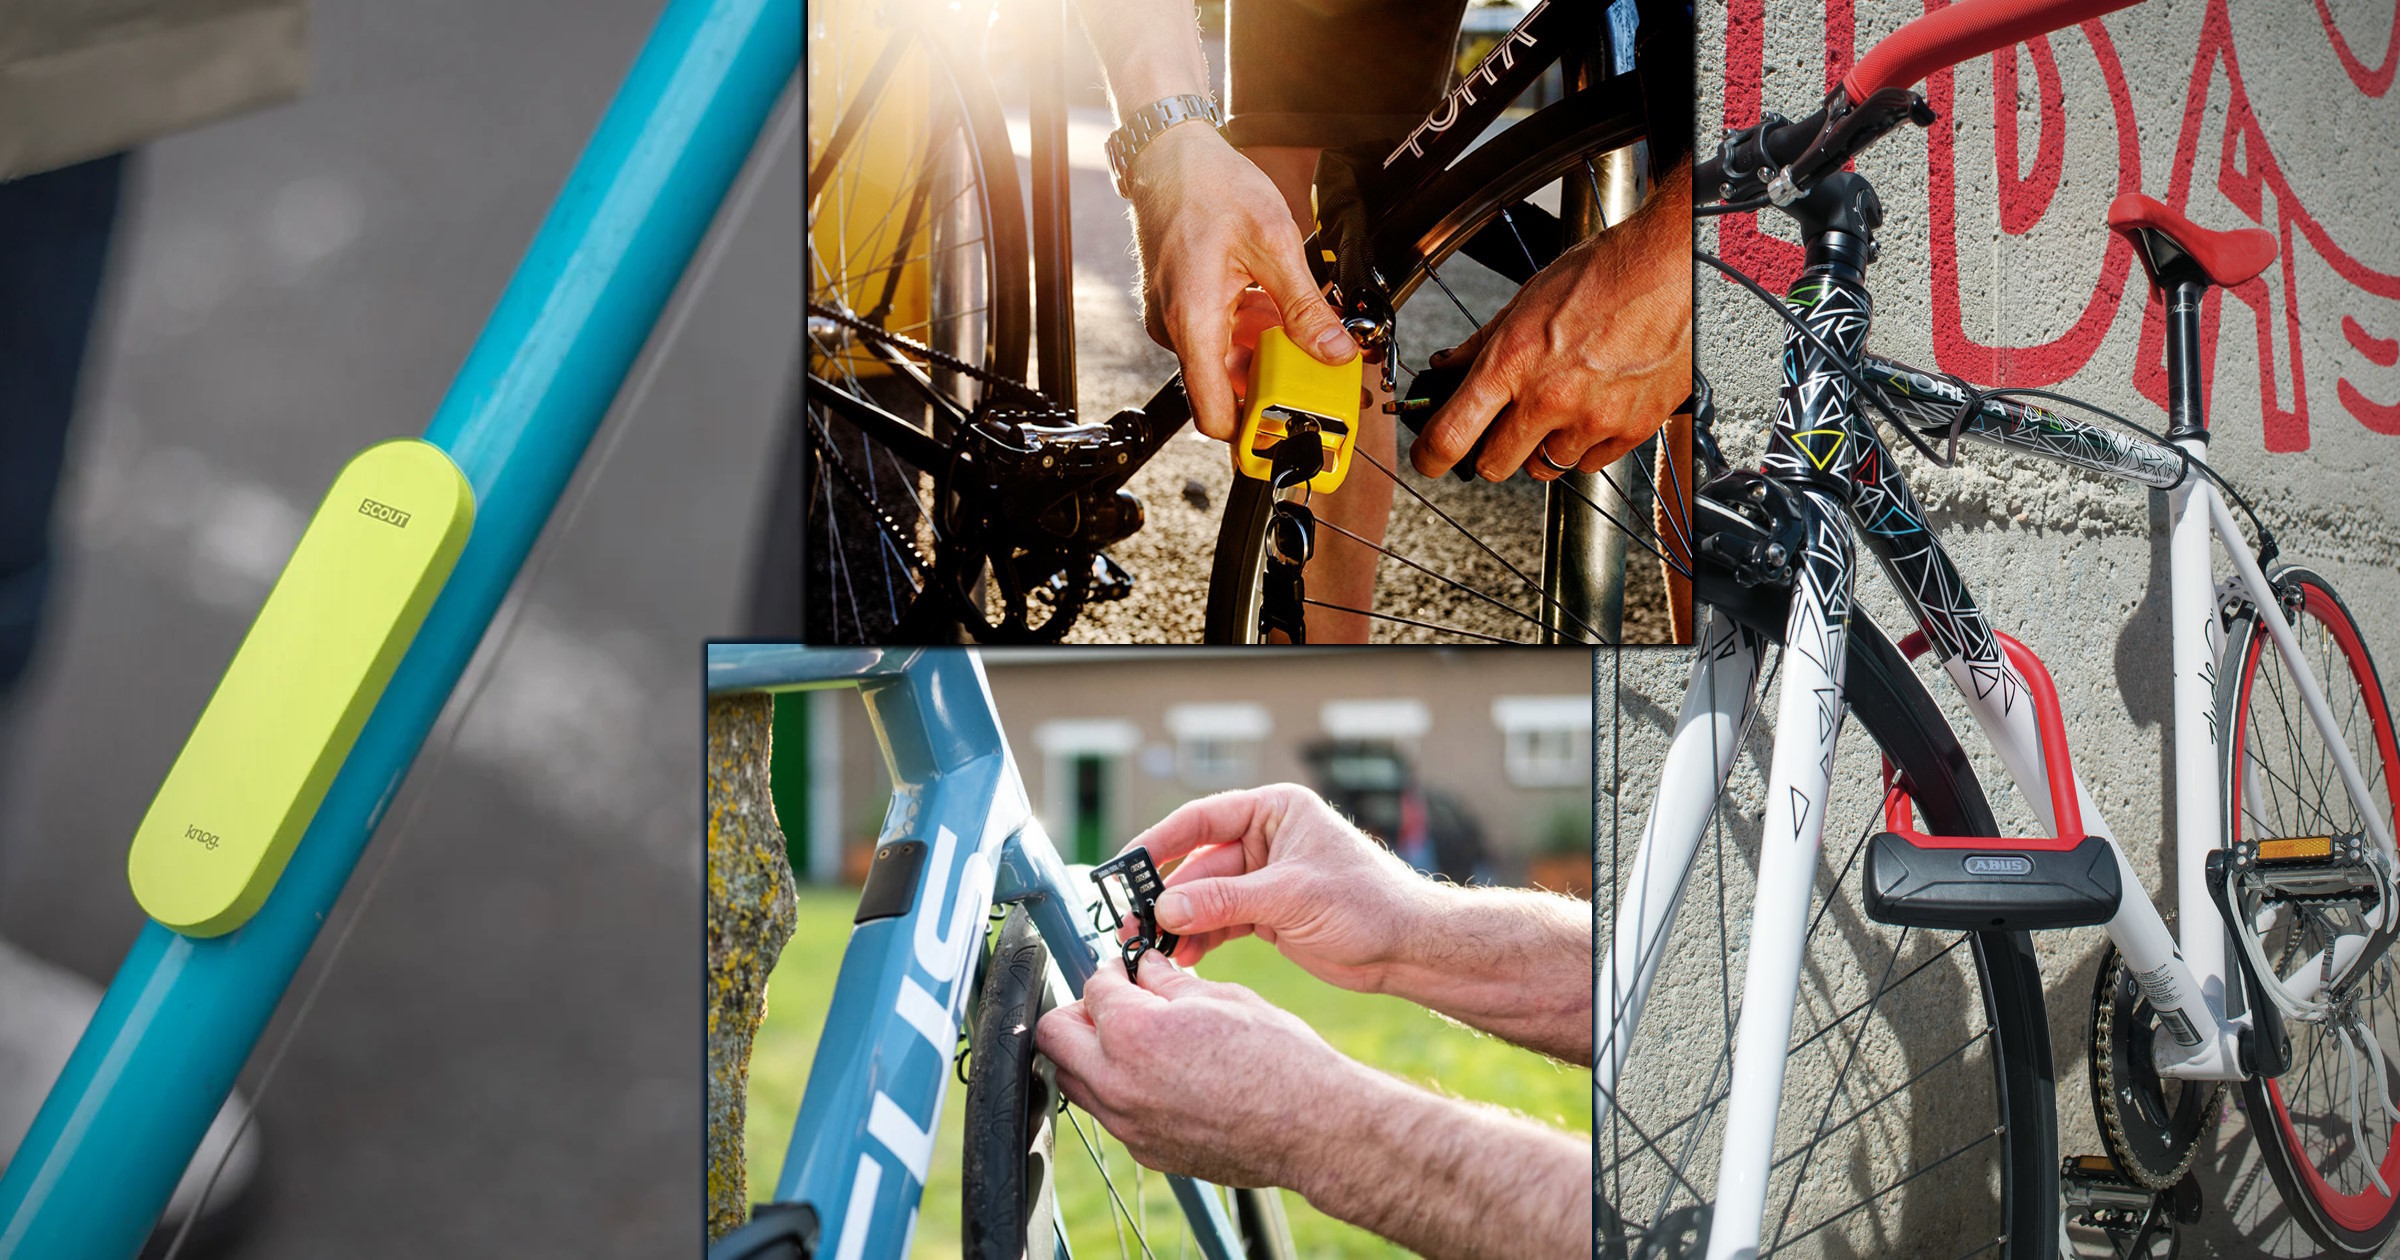 All bike locks can be compromised. Here's what to do about bike theft.